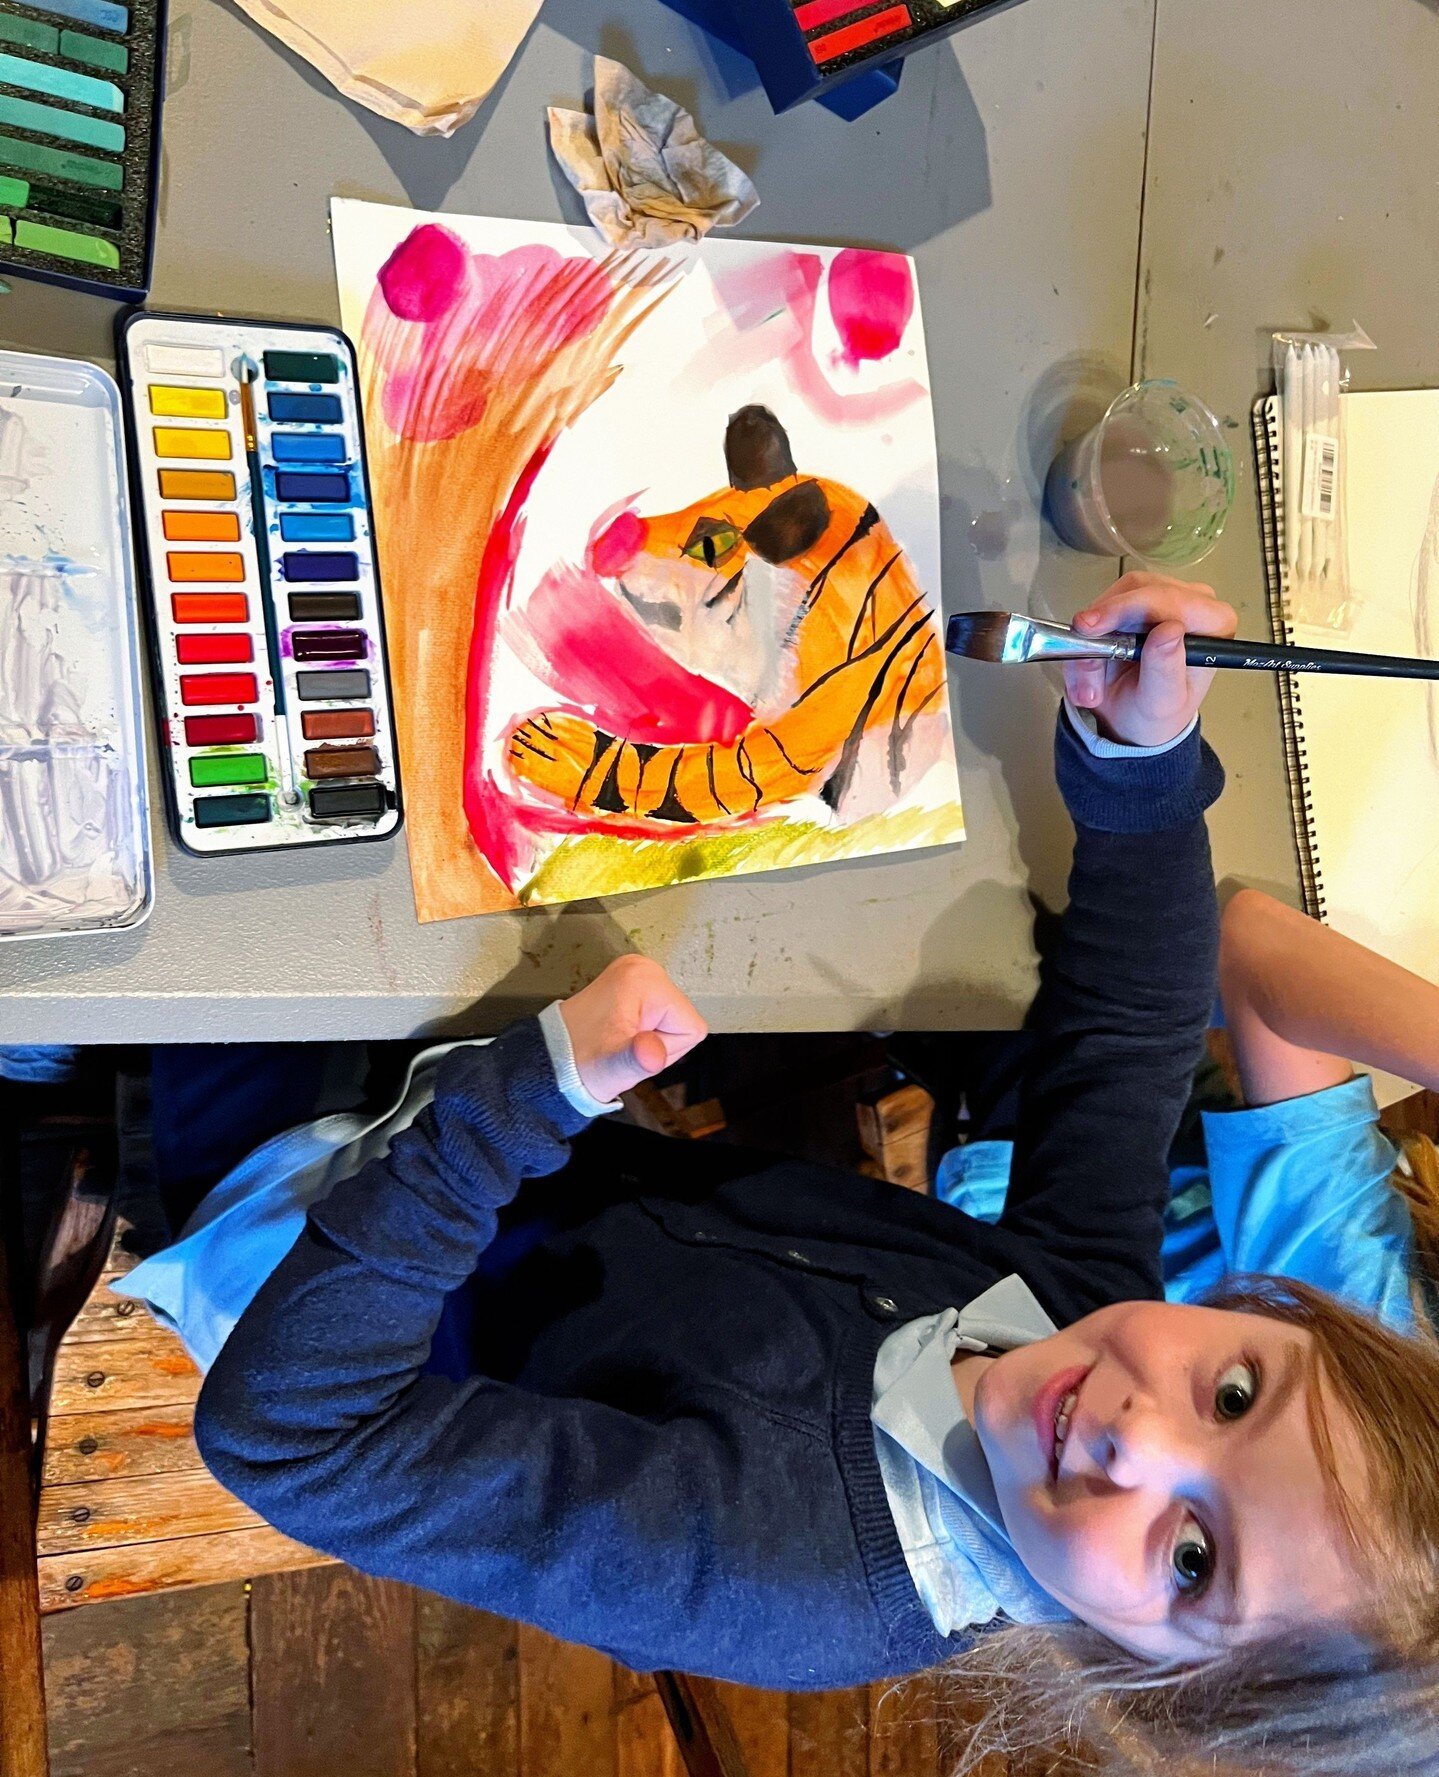 Did you know we now offer after school classes on Mondays, Tuesdays and Wednesdays at @the_tigermen_den? Classes are designed for students looking for small group, personalized art instruction, in an inspiring environment! We have two age groups and 